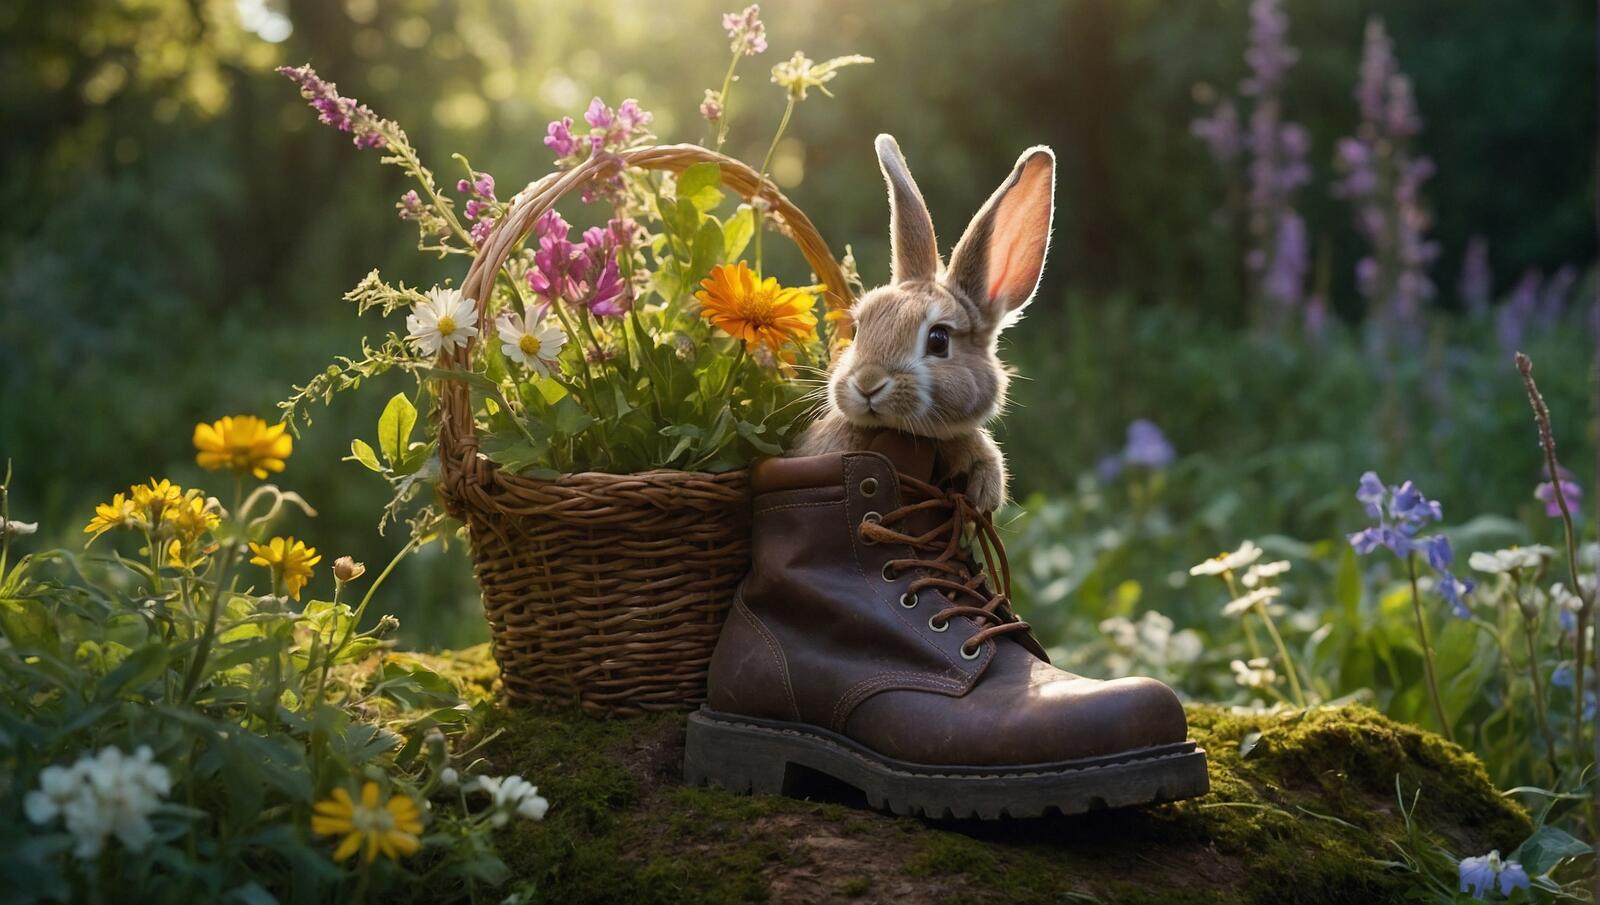 Free photo A rabbit sits inside of a basket of flowers on the ground